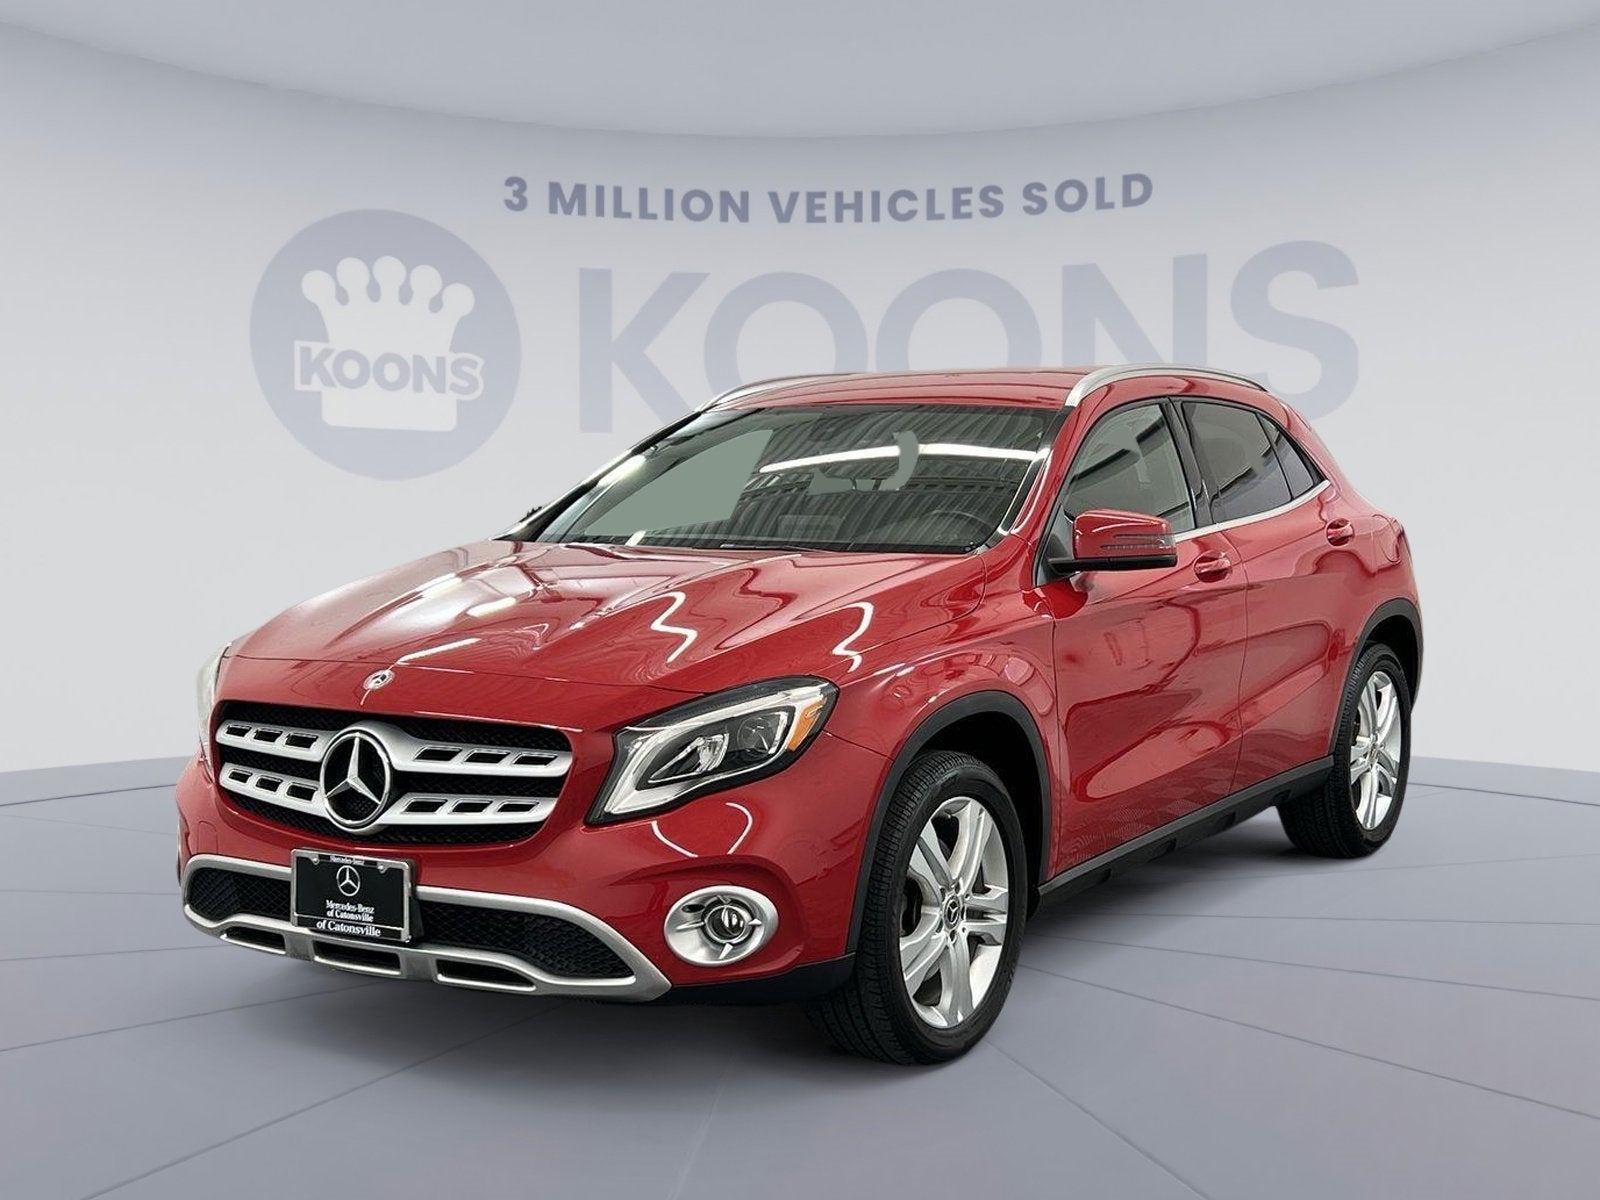 Used 2019 Mercedes-Benz GLA 250 SUV For Sale Baltimore MD | Columbia |  00P6486A